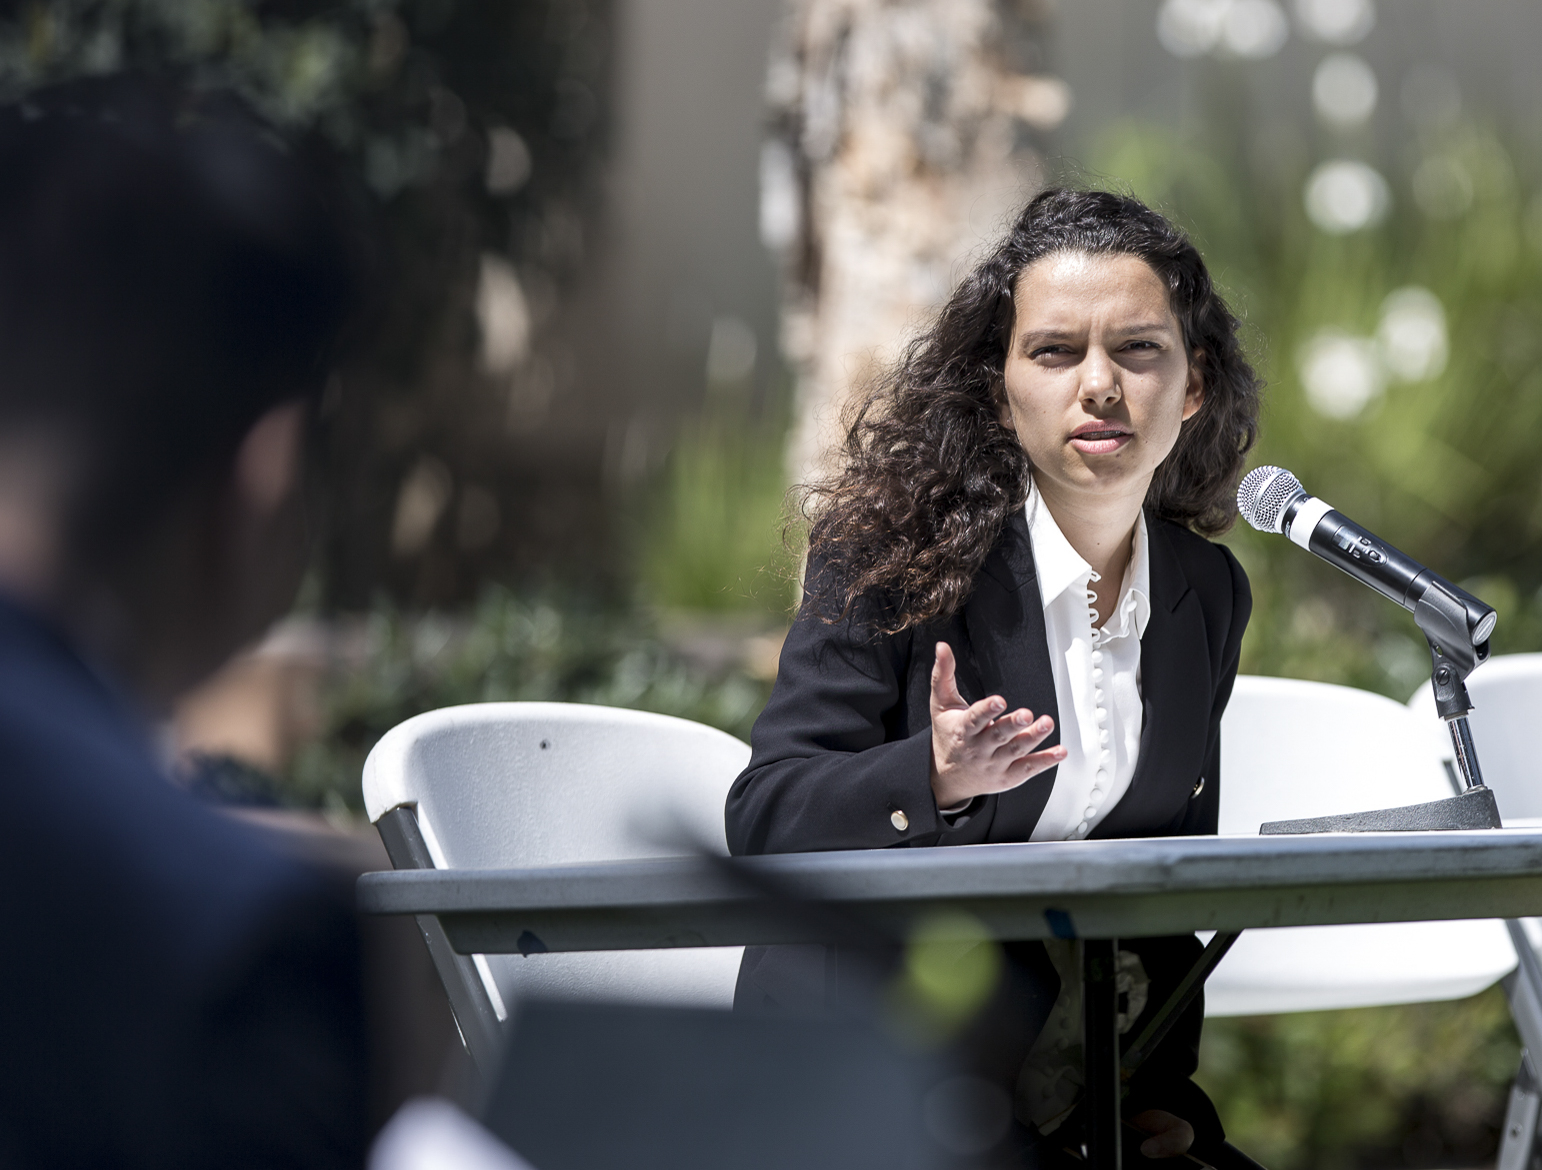  Santa Monica College Associated Student (A.S) Director of Budget Management candidate Maria Damien discusses why she would be a great choice if elected A.S Director of Budget Management during the A.S election debate on the quad of the Santa Monica 